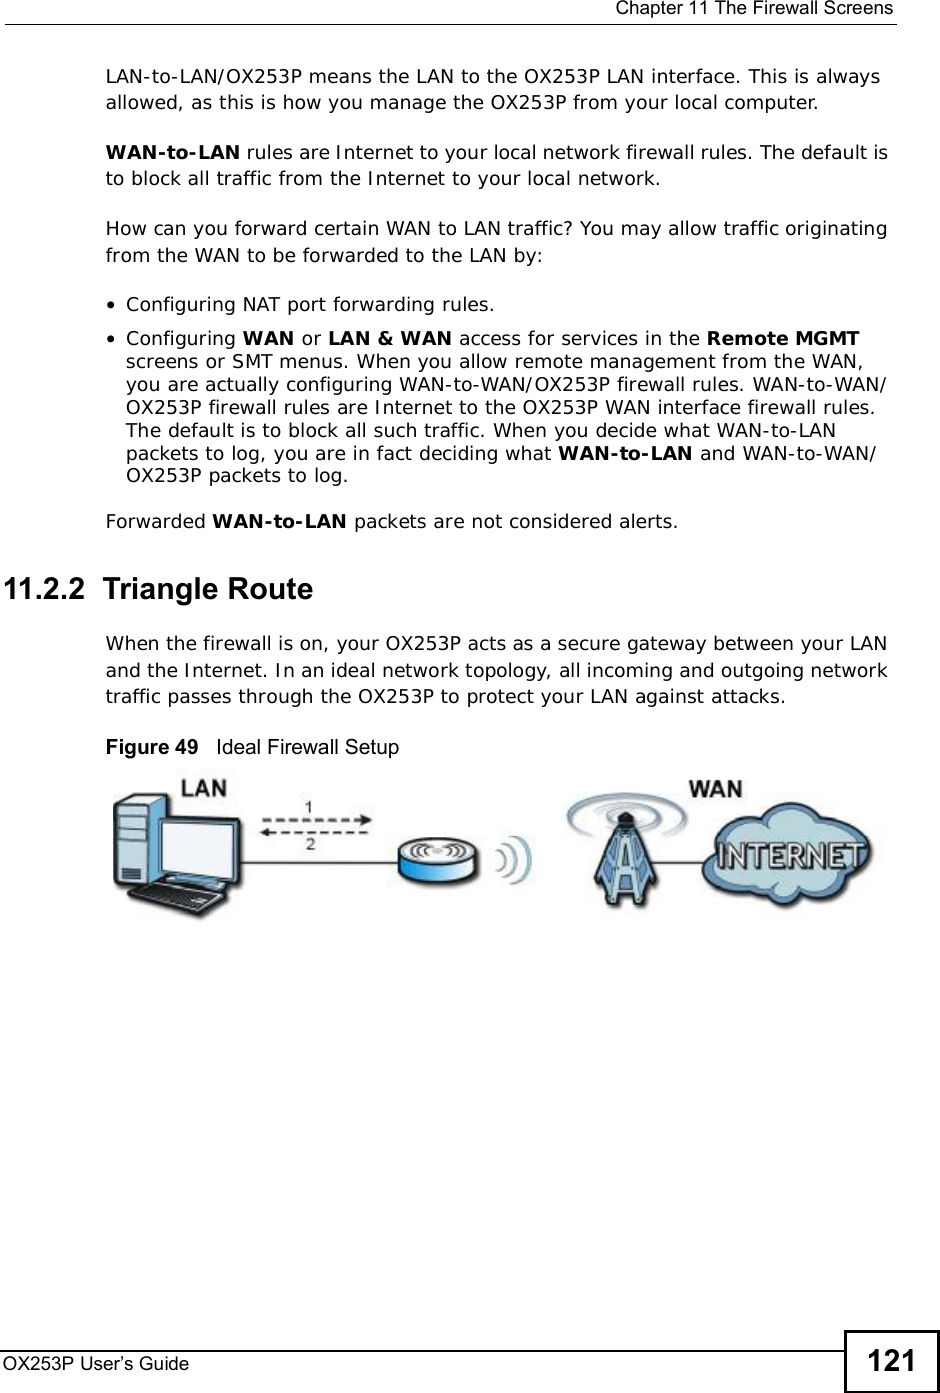  Chapter 11The Firewall ScreensOX253P User’s Guide 121LAN-to-LAN/OX253P means the LAN to the OX253P LAN interface. This is always allowed, as this is how you manage the OX253P from your local computer.WAN-to-LAN rules are Internet to your local network firewall rules. The default is to block all traffic from the Internet to your local network. How can you forward certain WAN to LAN traffic? You may allow traffic originating from the WAN to be forwarded to the LAN by:•Configuring NAT port forwarding rules.•Configuring WAN or LAN &amp; WAN access for services in the Remote MGMTscreens or SMT menus. When you allow remote management from the WAN, you are actually configuring WAN-to-WAN/OX253P firewall rules. WAN-to-WAN/OX253P firewall rules are Internet to the OX253P WAN interface firewall rules. The default is to block all such traffic. When you decide what WAN-to-LAN packets to log, you are in fact deciding what WAN-to-LAN and WAN-to-WAN/OX253P packets to log. Forwarded WAN-to-LAN packets are not considered alerts.11.2.2  Triangle RouteWhen the firewall is on, your OX253P acts as a secure gateway between your LAN and the Internet. In an ideal network topology, all incoming and outgoing network traffic passes through the OX253P to protect your LAN against attacks.Figure 49   Ideal Firewall Setup